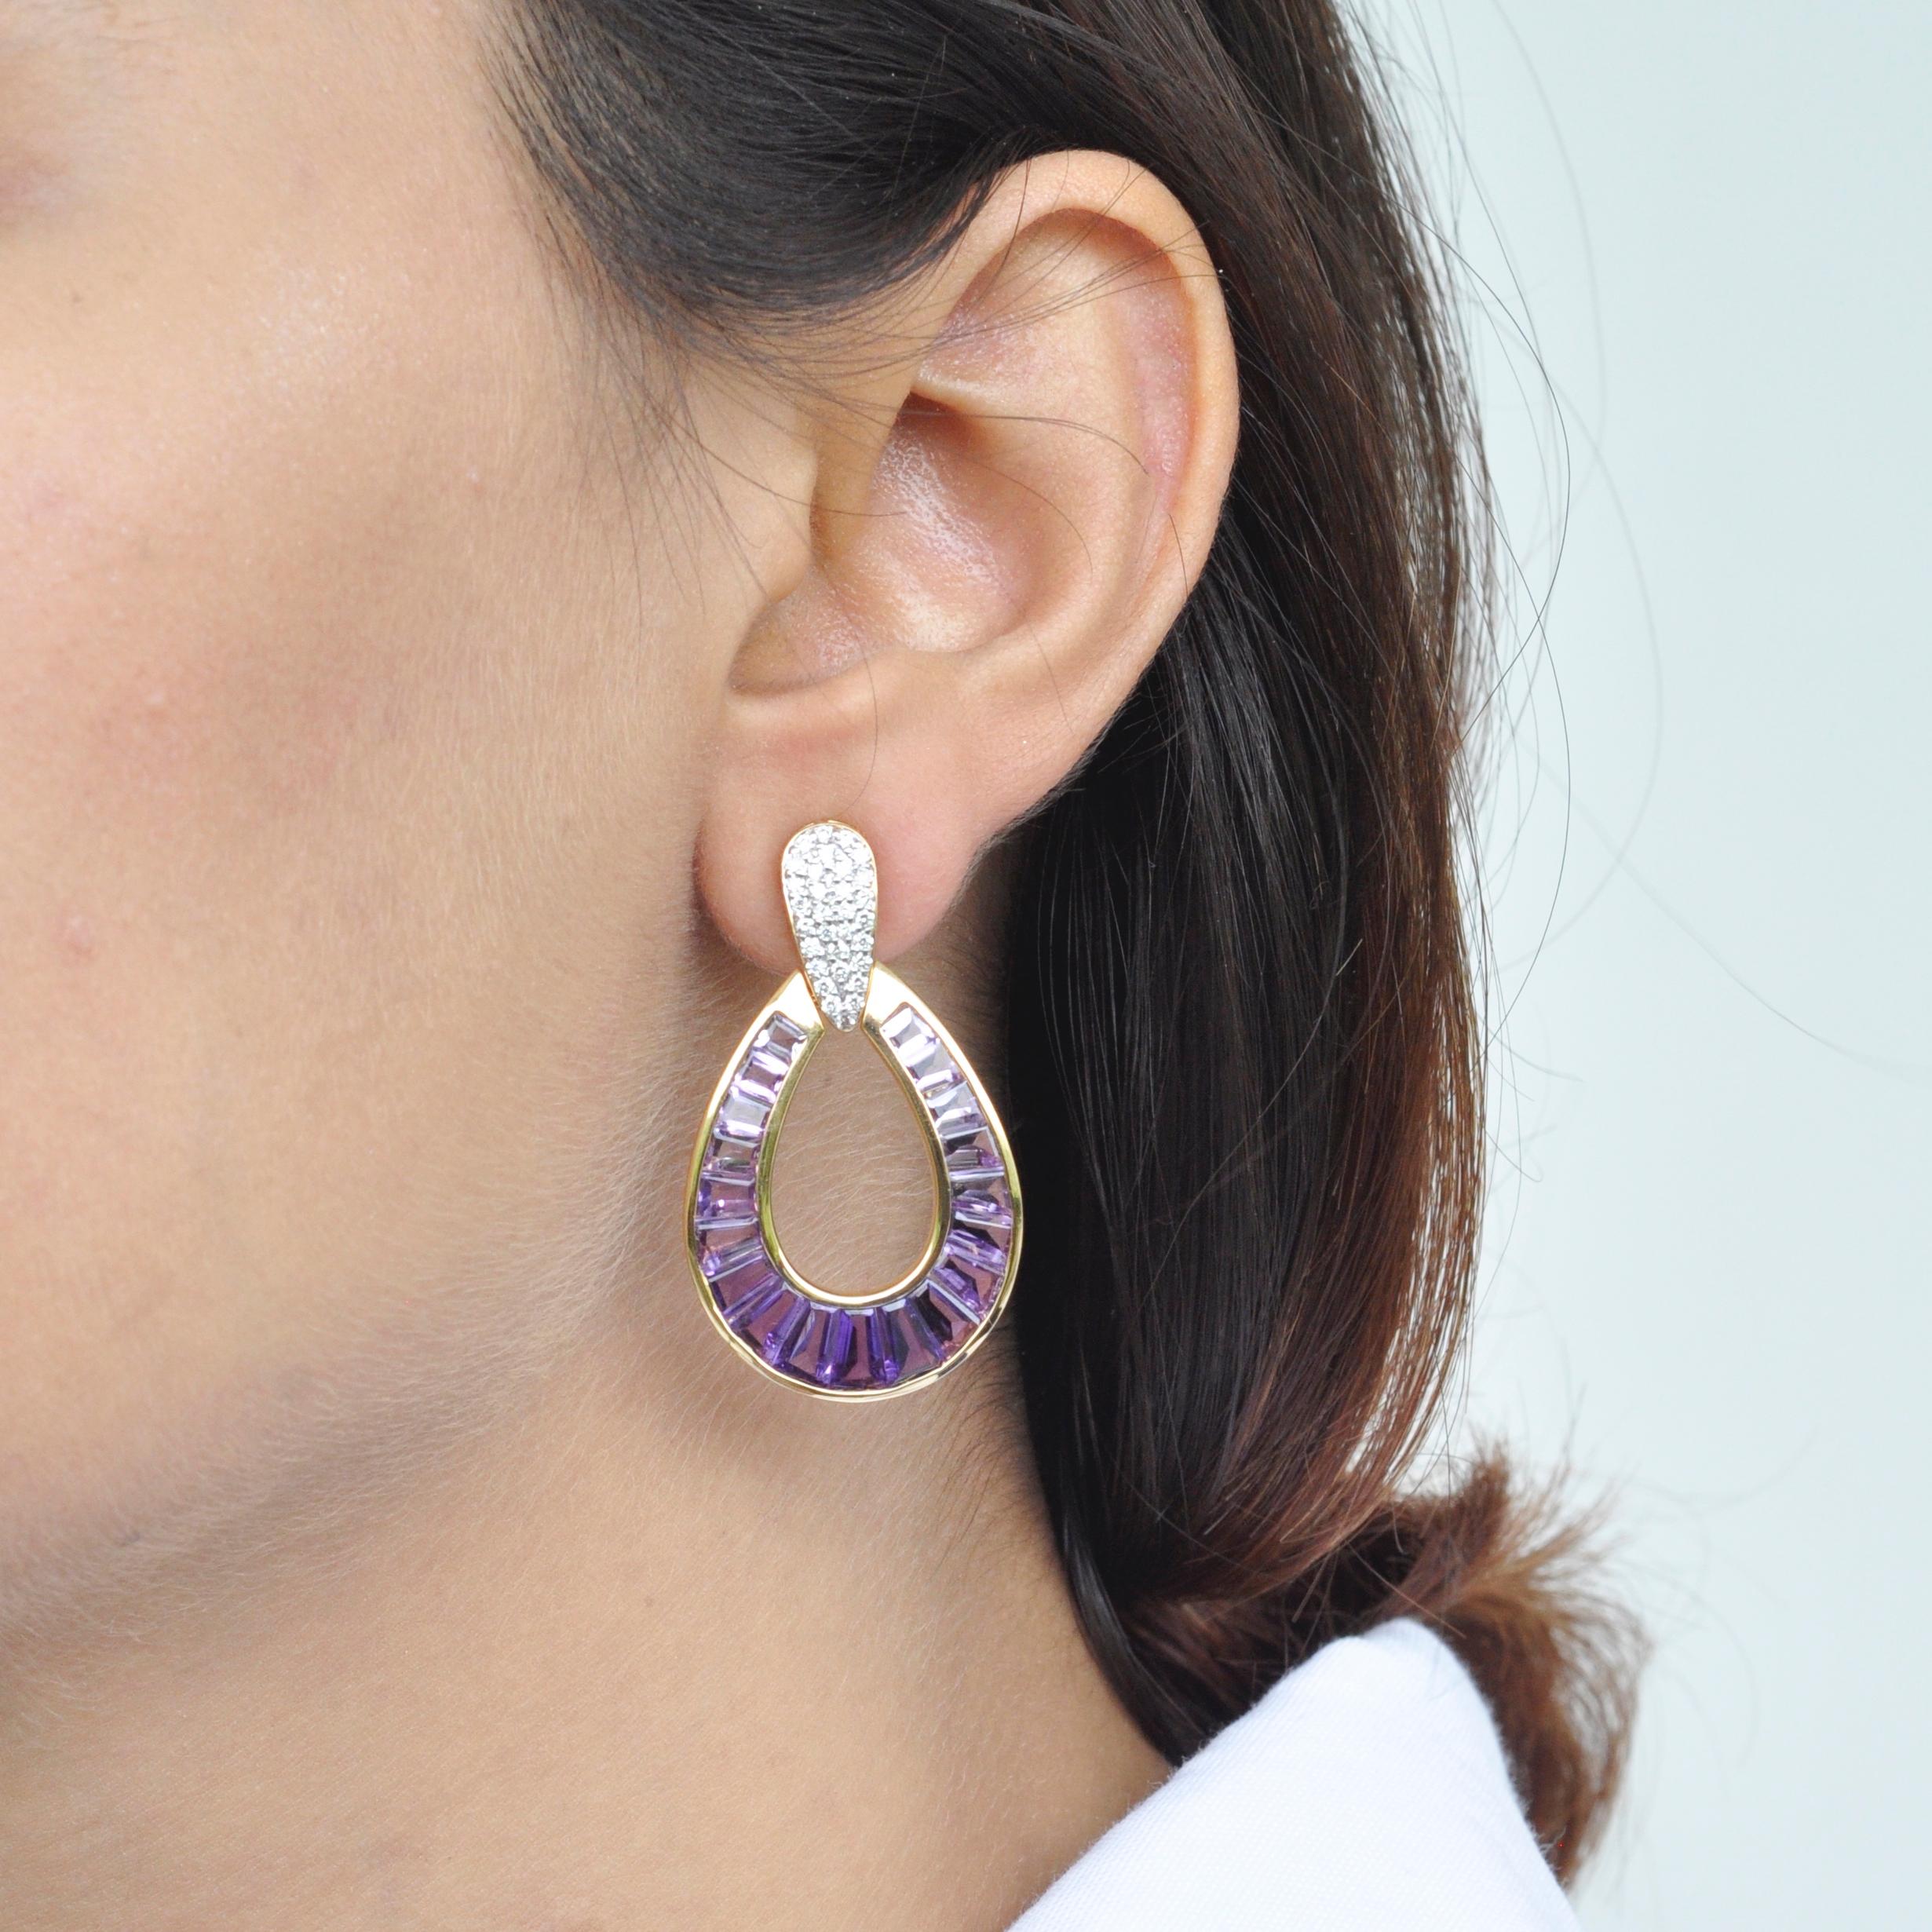 Art, color and culture all come together to inspire this 18 karat gold calibre cut amethyst taper baguette diamond dangling raindrop earrings, where dégradé (gradient) hues of amethyst exudes royalty and luxury while dictating the movement of eye.